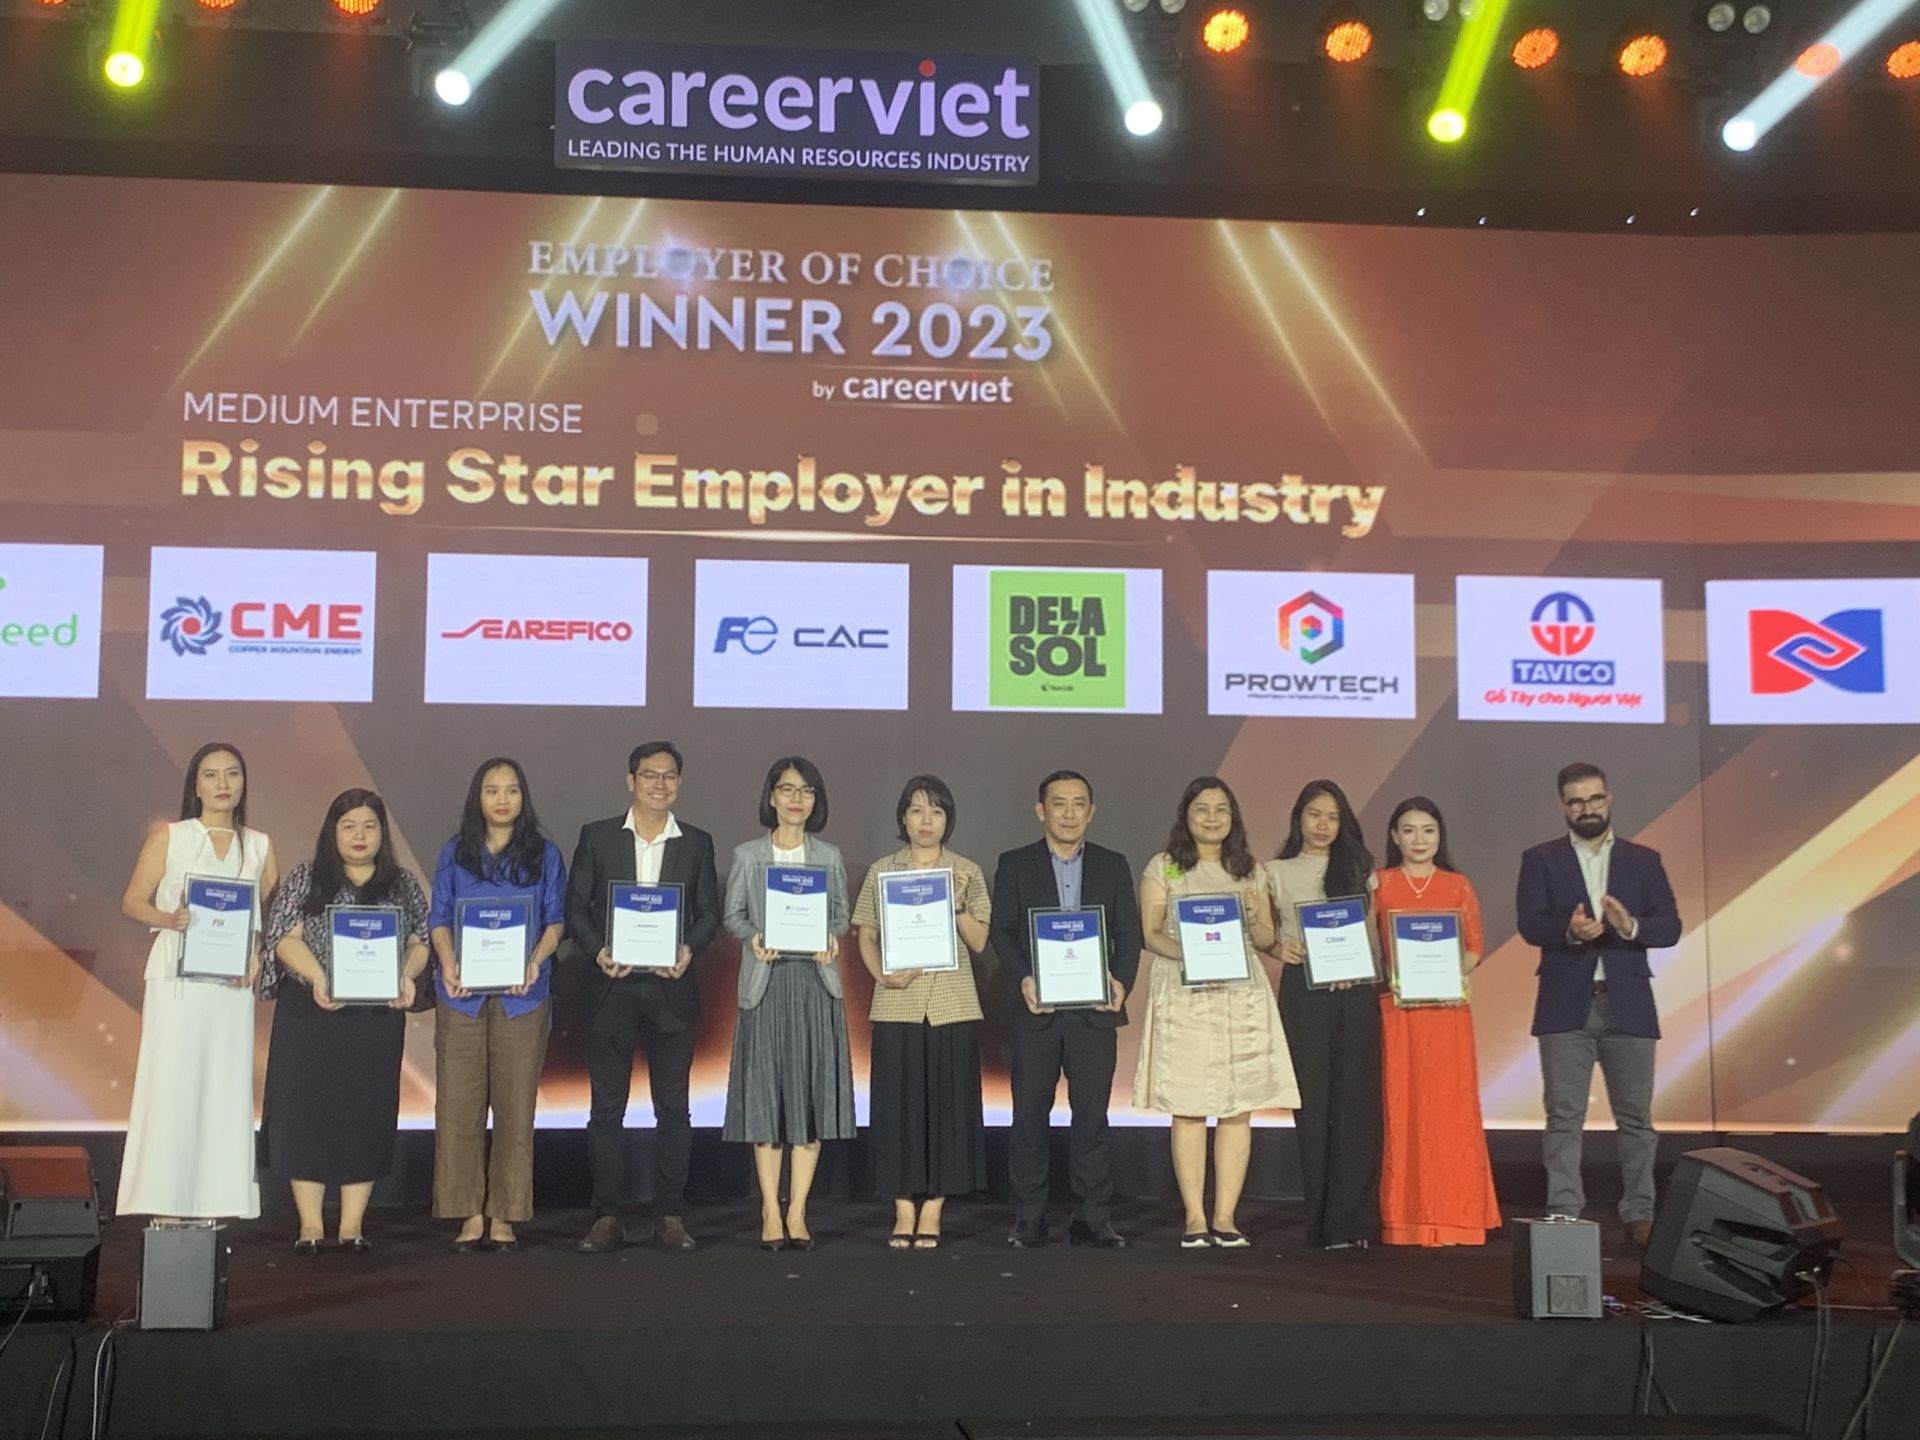 The candidates were given the award Rising Star Employer